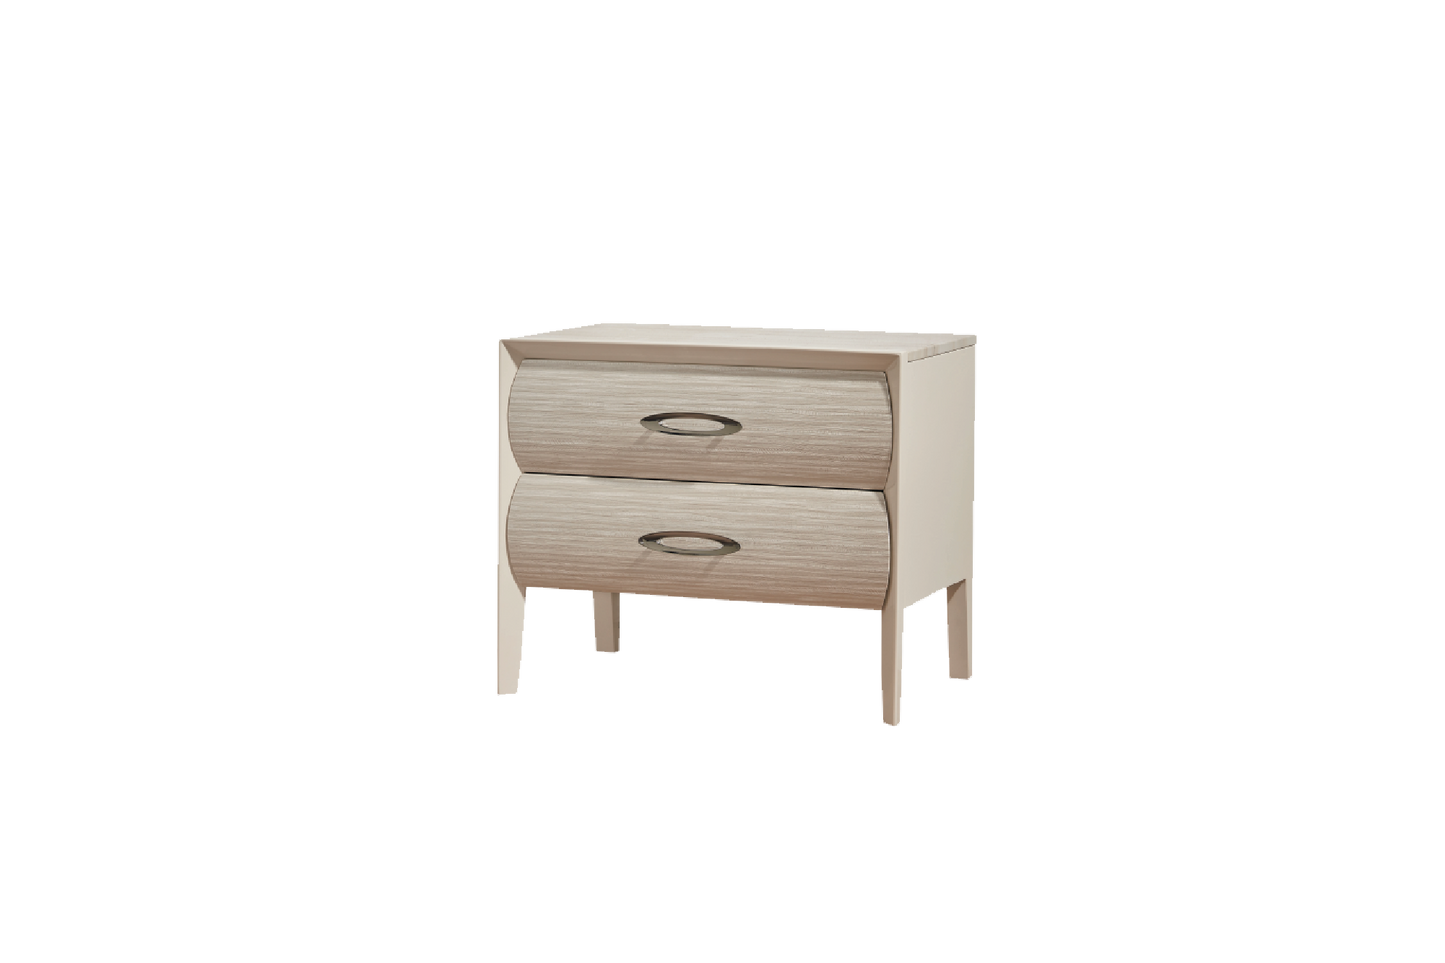 Risca Side Table